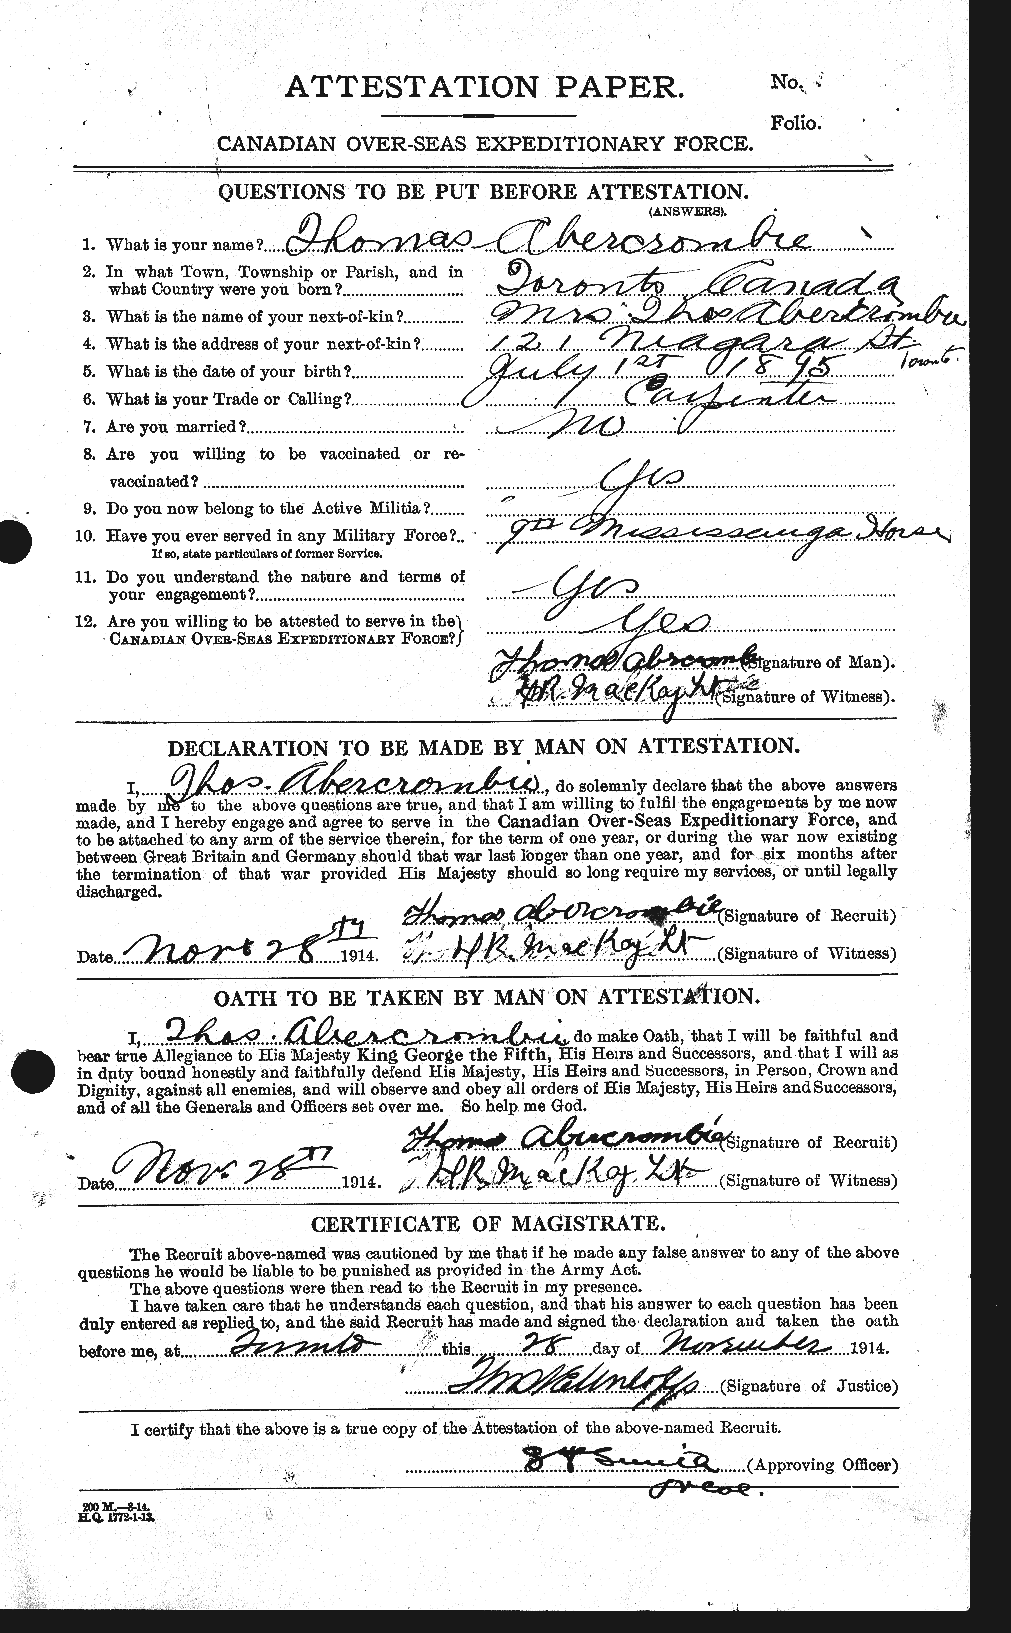 Personnel Records of the First World War - CEF 201489a